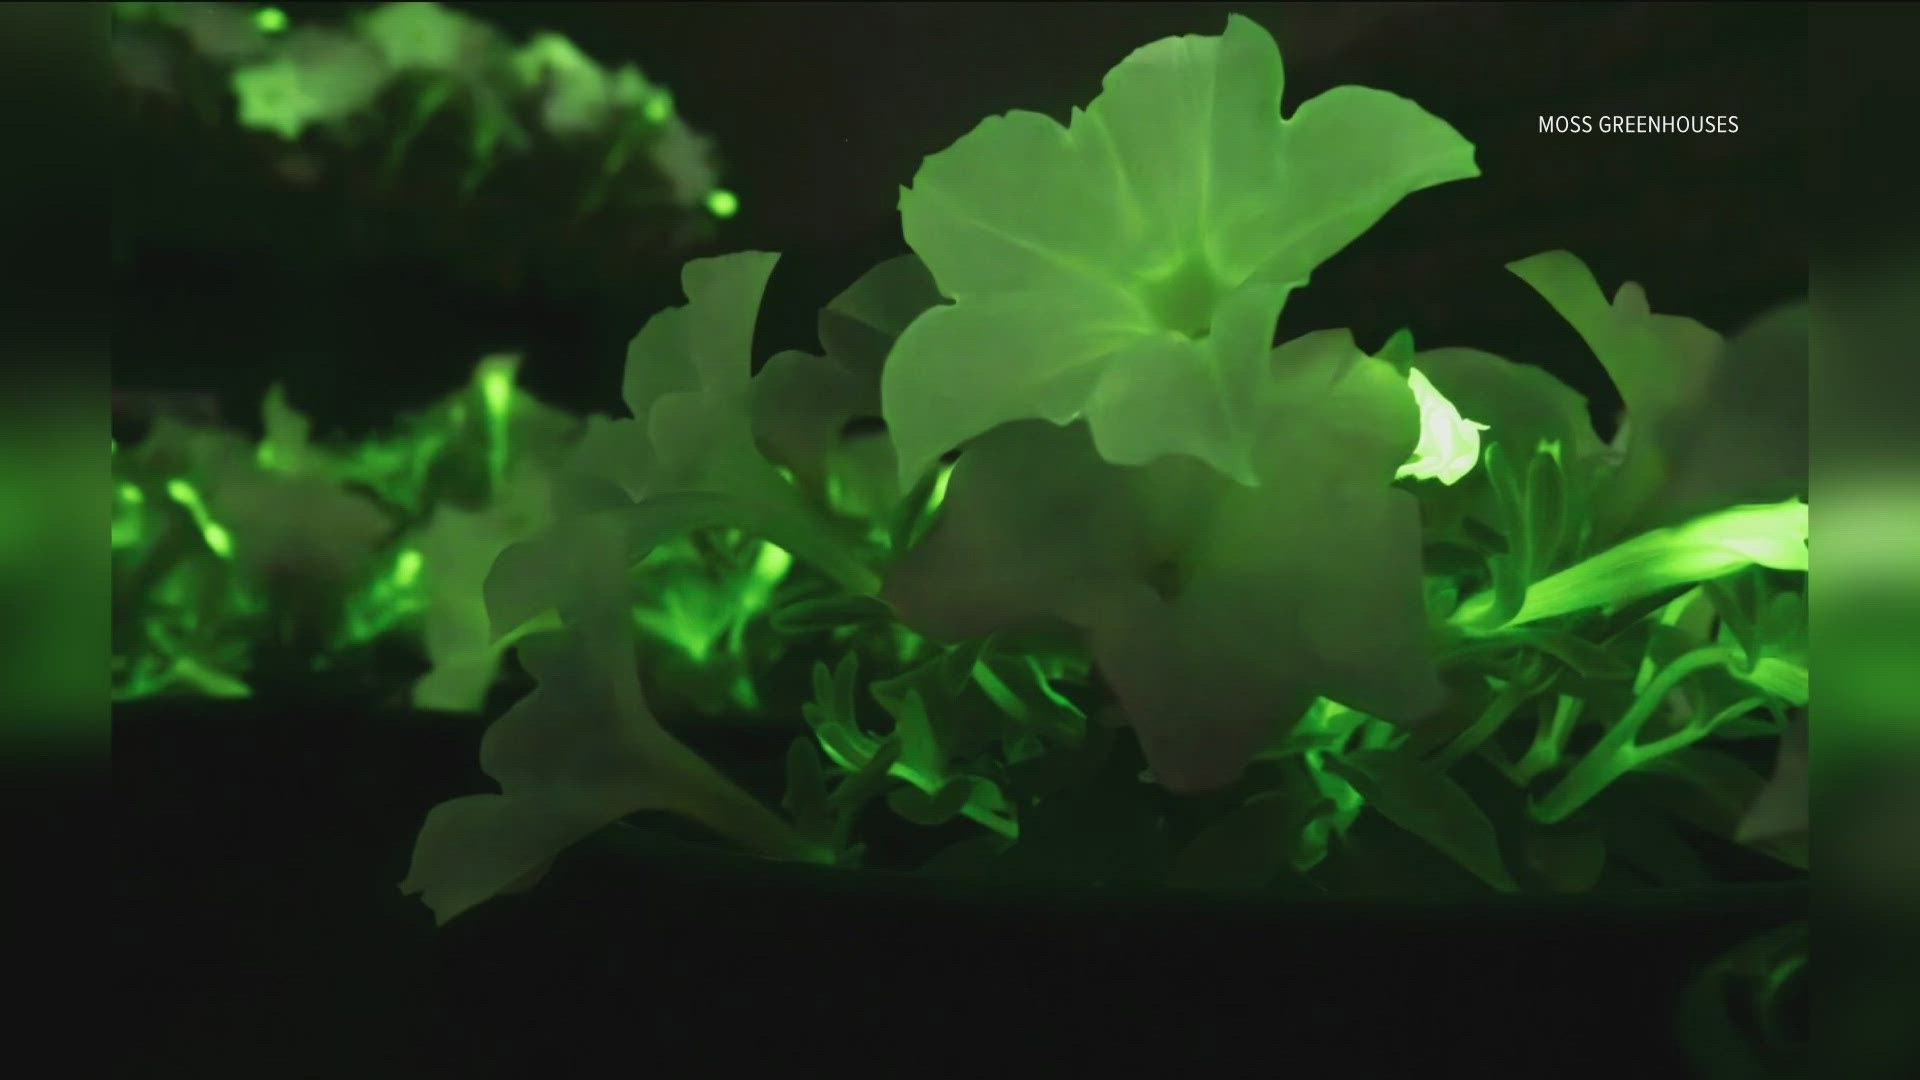 Moss Greenhouse is one of two growers in the country offering the Firefly Petunia, and will unveil the bioluminescent plant on May 31.